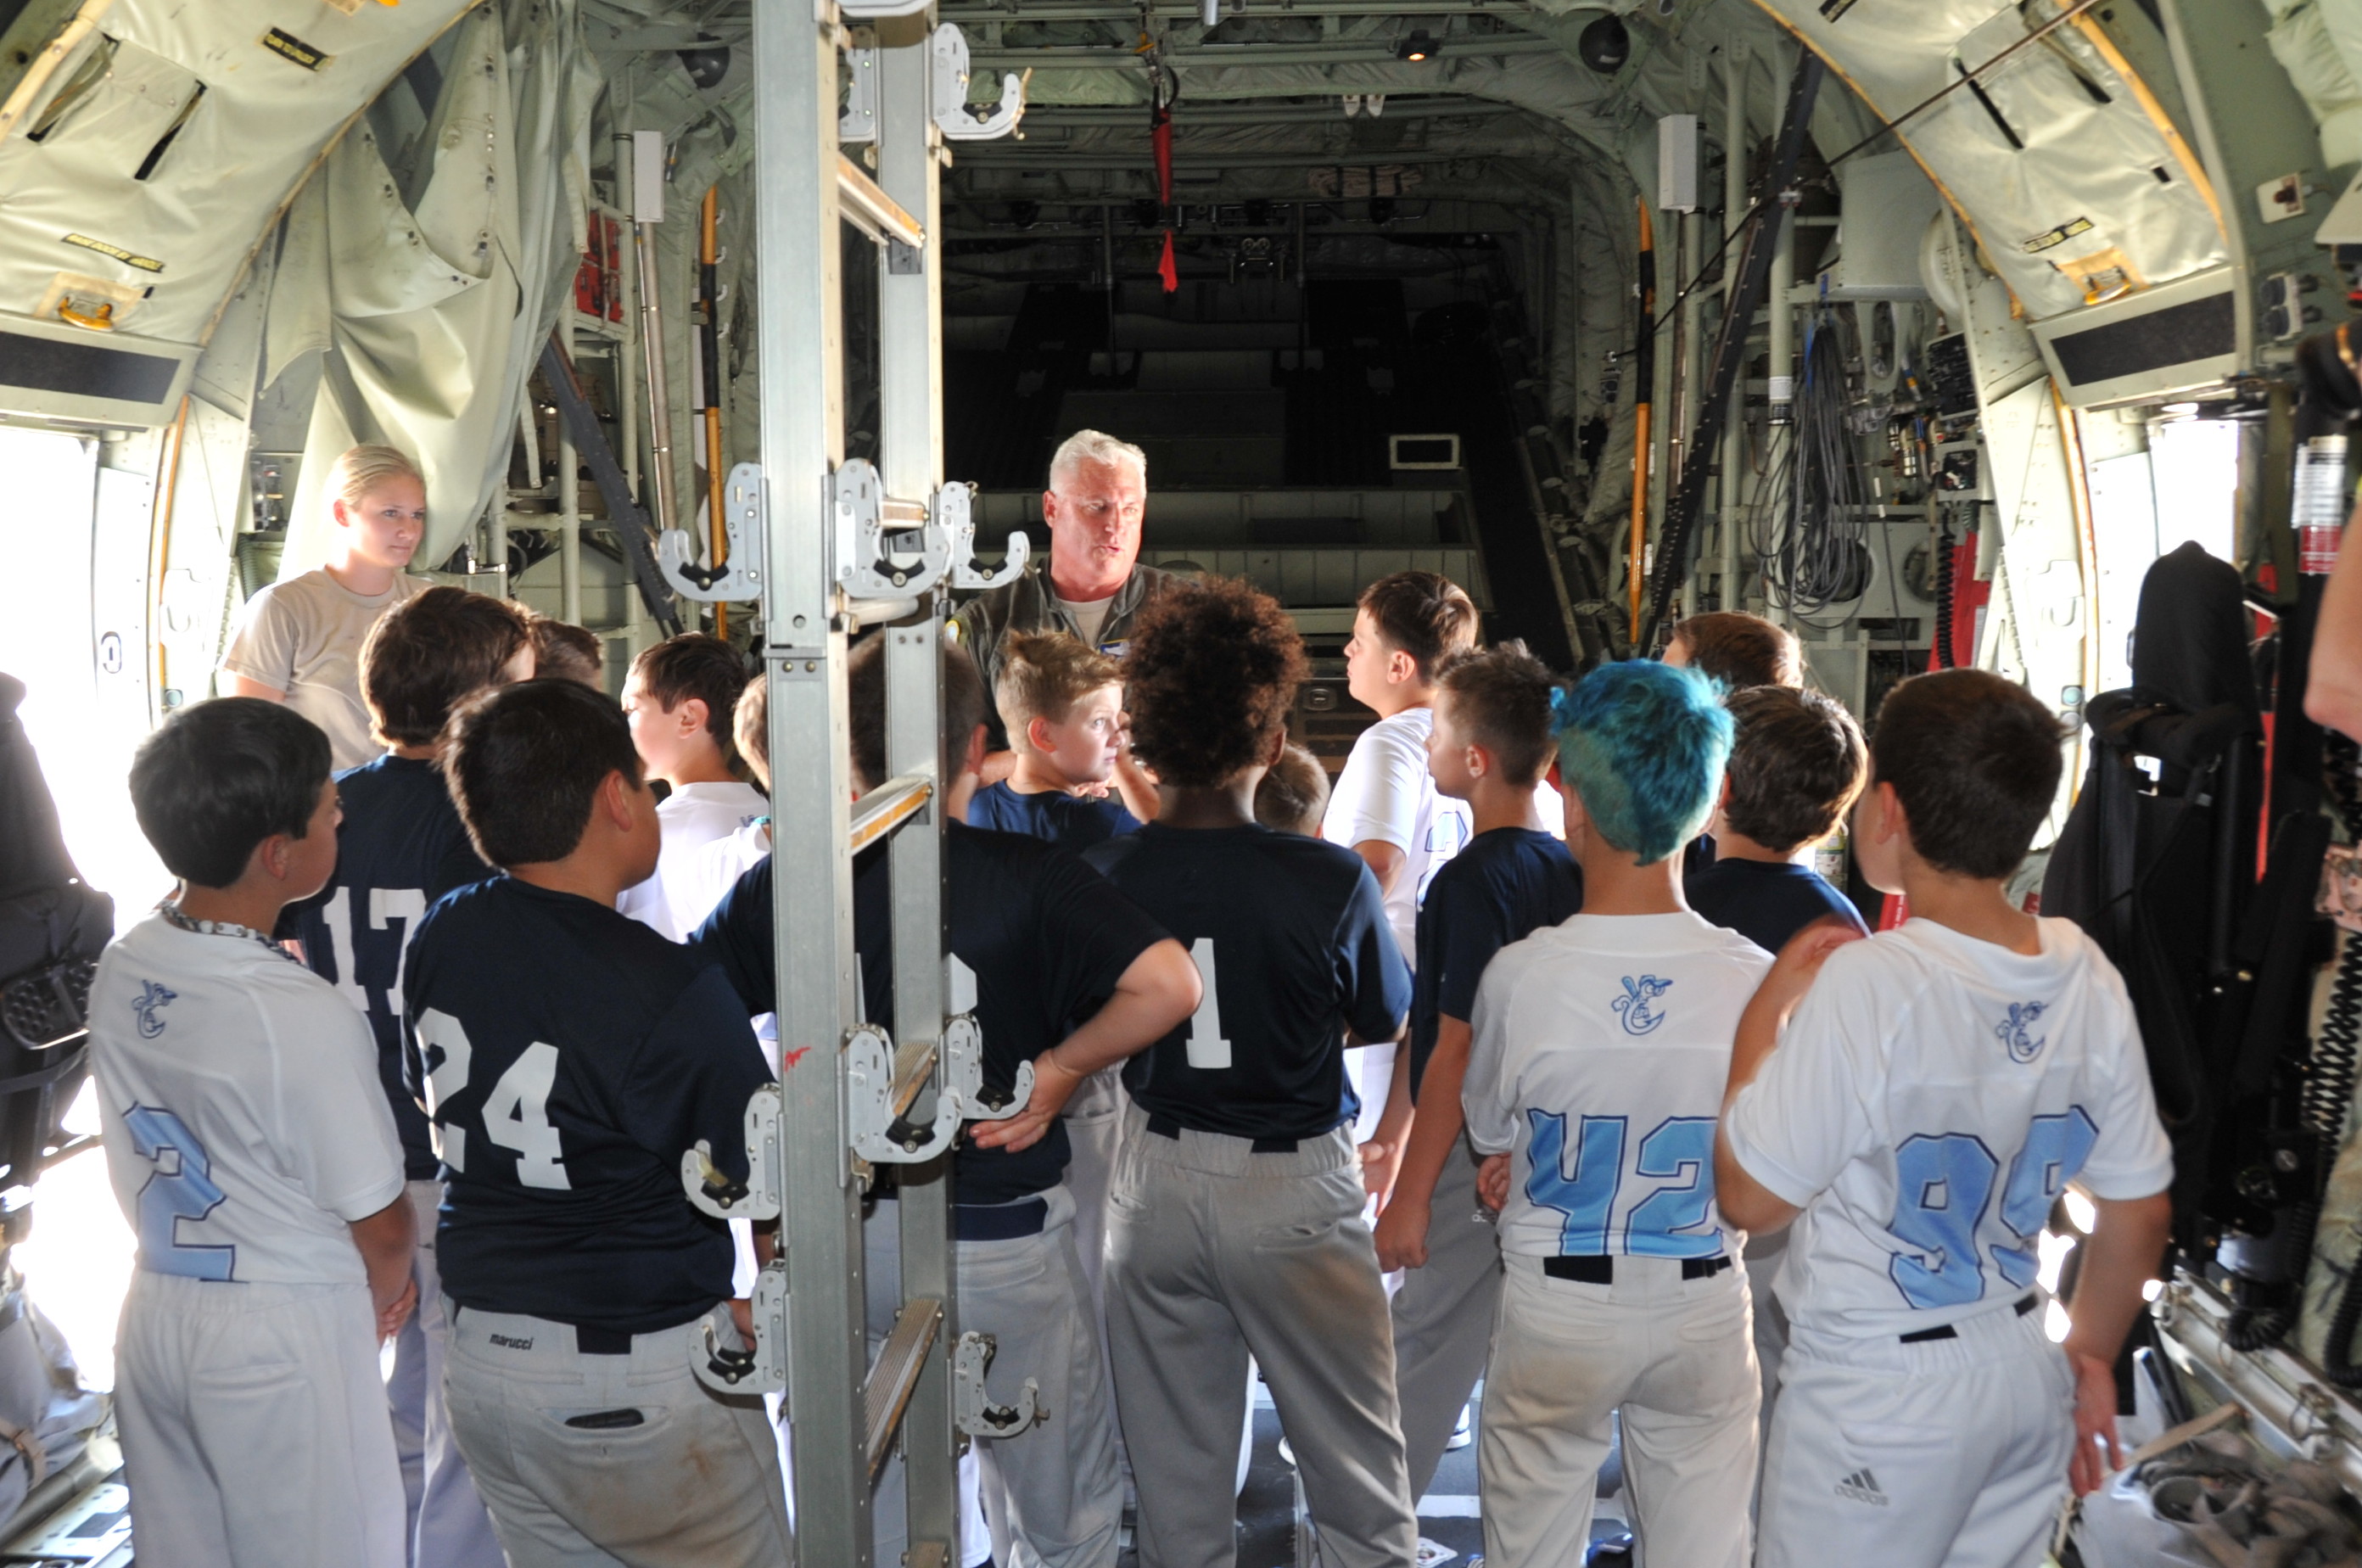 Lt. Col. Shane Devlin, 53rd Weather Reconnaissance pilot instructor, gives the Crescent City Hooks youth baseball team a tour of a WC-130J at Keesler Air Force Base, Miss. today. (U.S. Air Force photo by Master Sgt. Jessica Kendziorek)